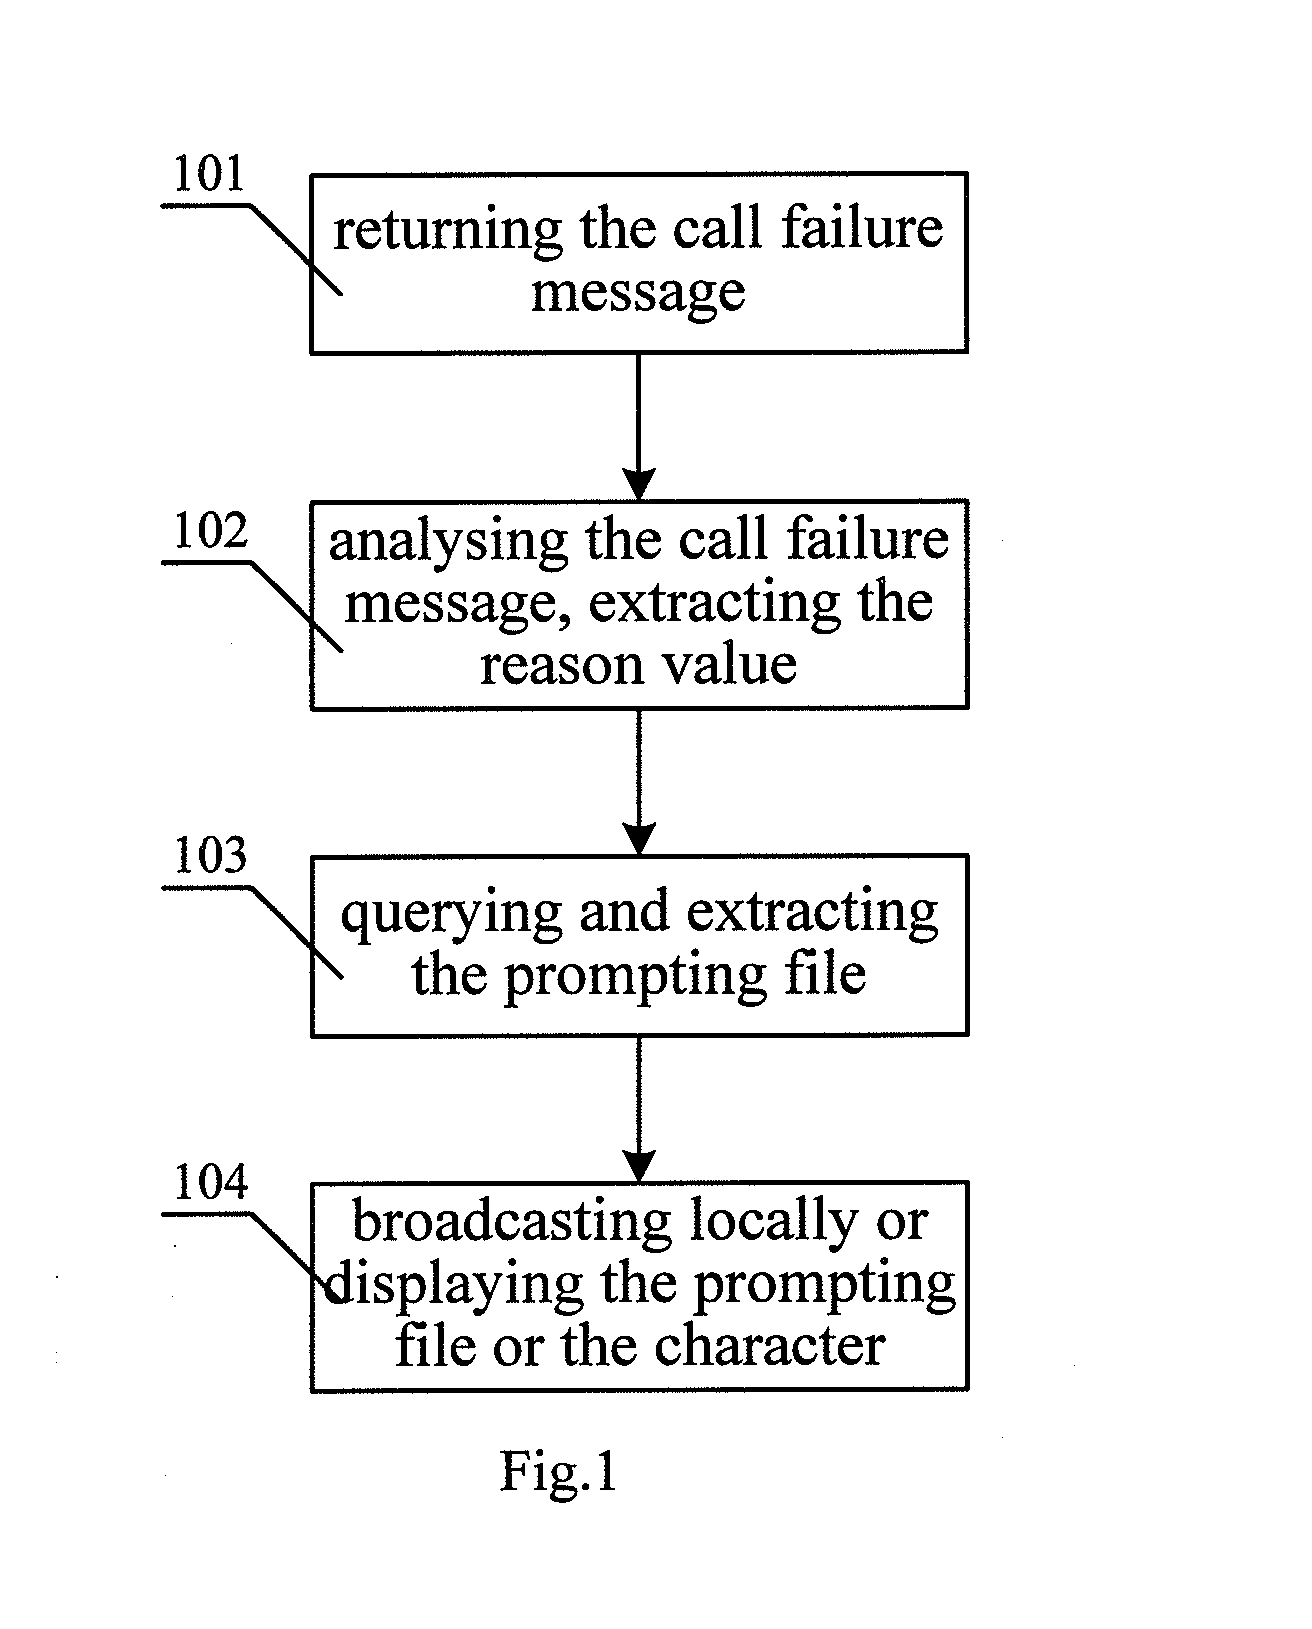 Method for Processing the Defeated Videophone Call Based on Mobile Communication Network